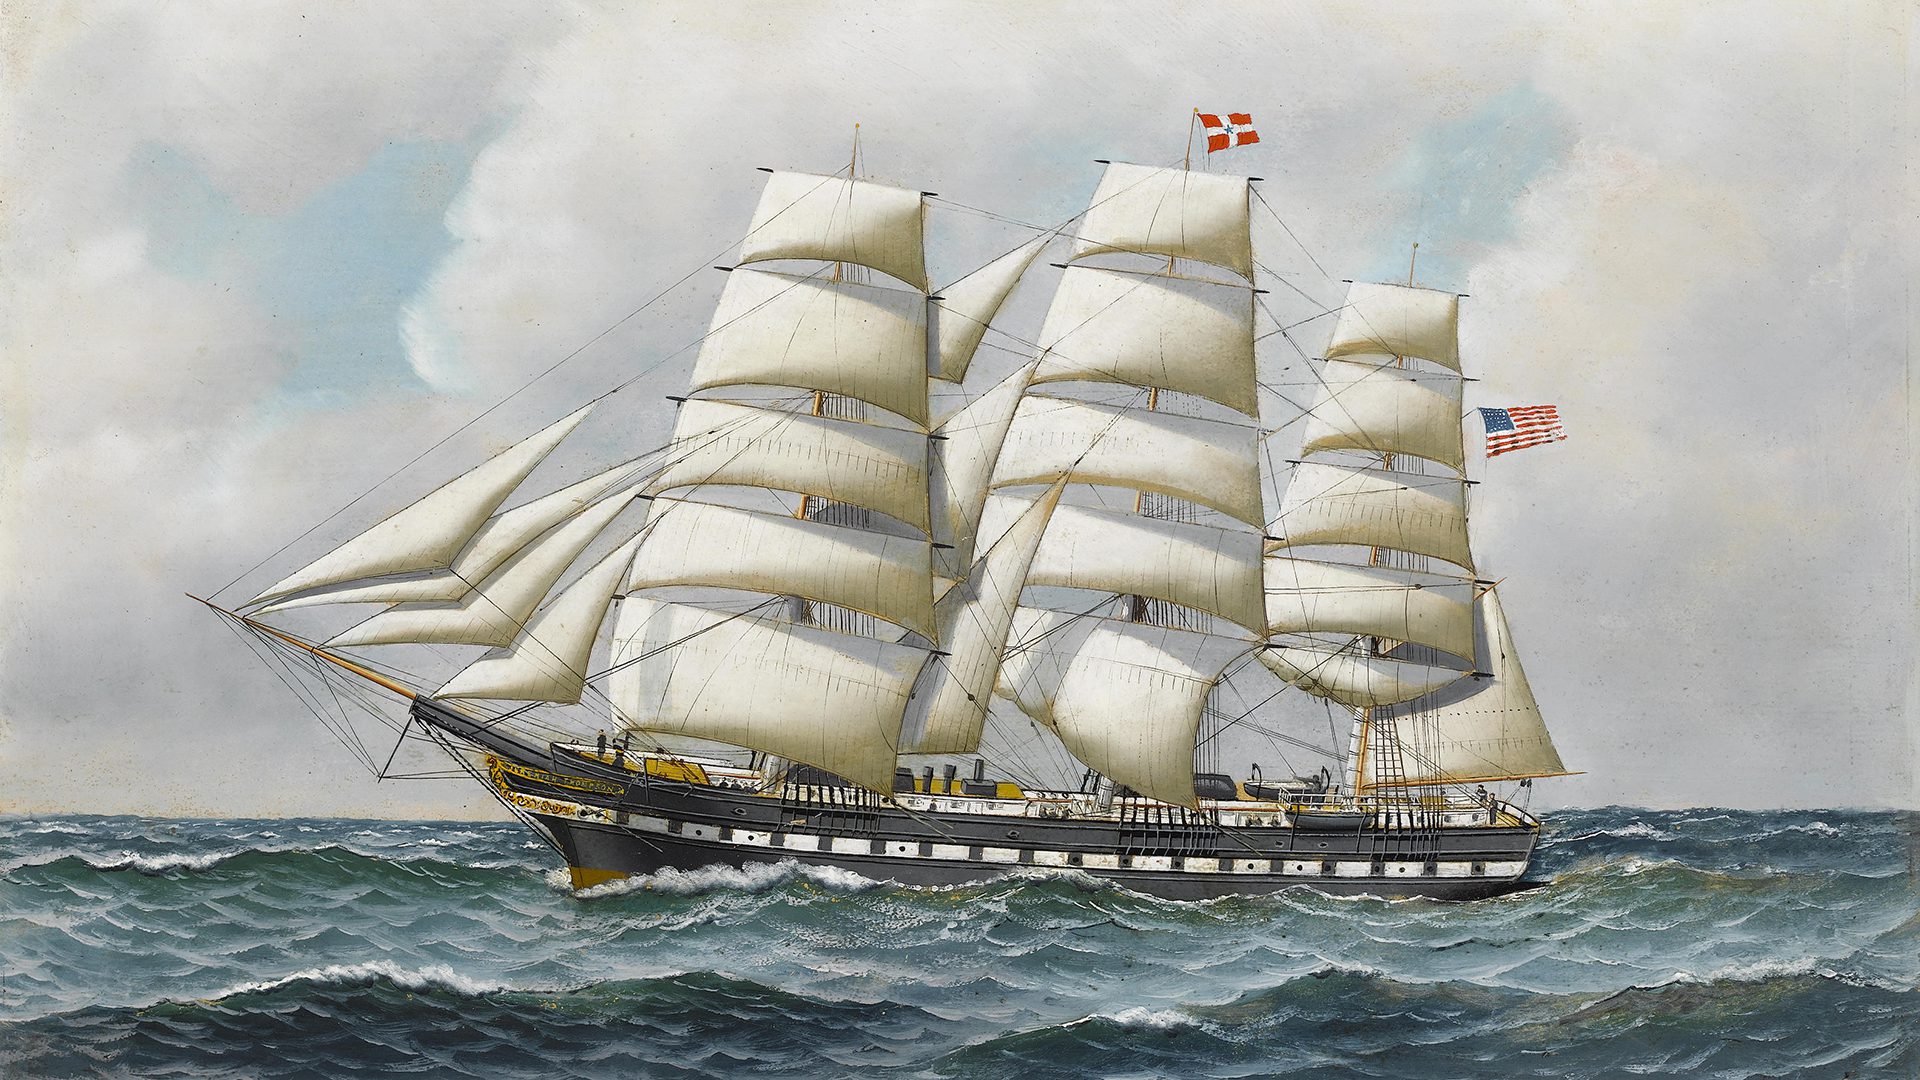 An example of a square-rigged tall ship that could be literally taken aback. "The American full-rigger Jeremiah Thompson' at sea," Antonio Jacobsen, 1910.